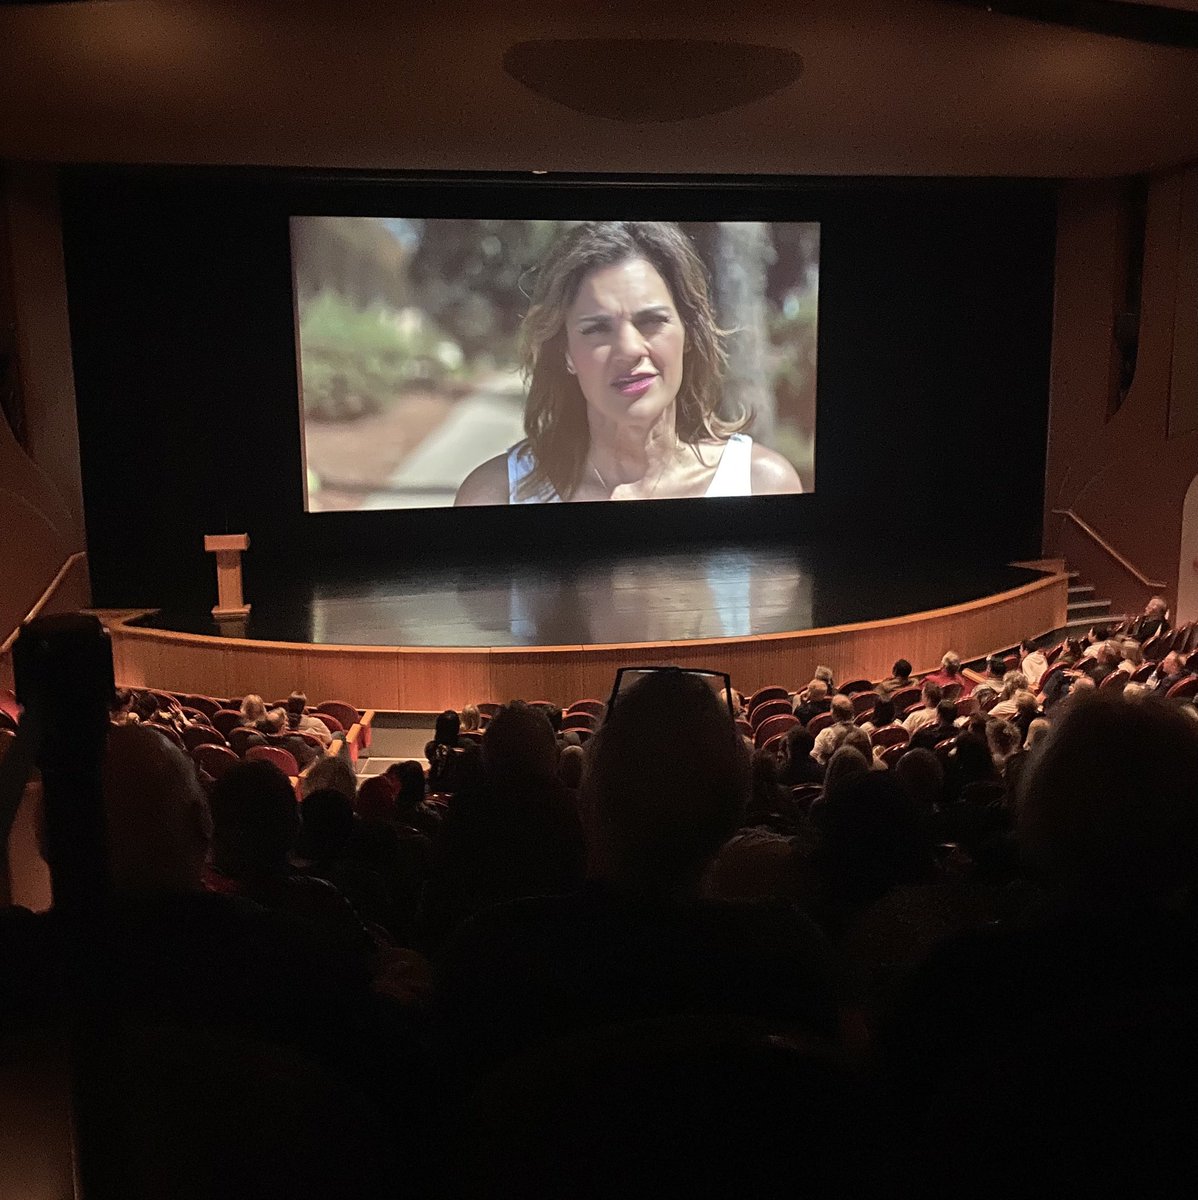 Unthinkable, an Abby Johnson film is now playing at tonight’s Canadian screening. Great crowd ahead of the National #marchforlife @AbbyJohnson #mightymotionpictures